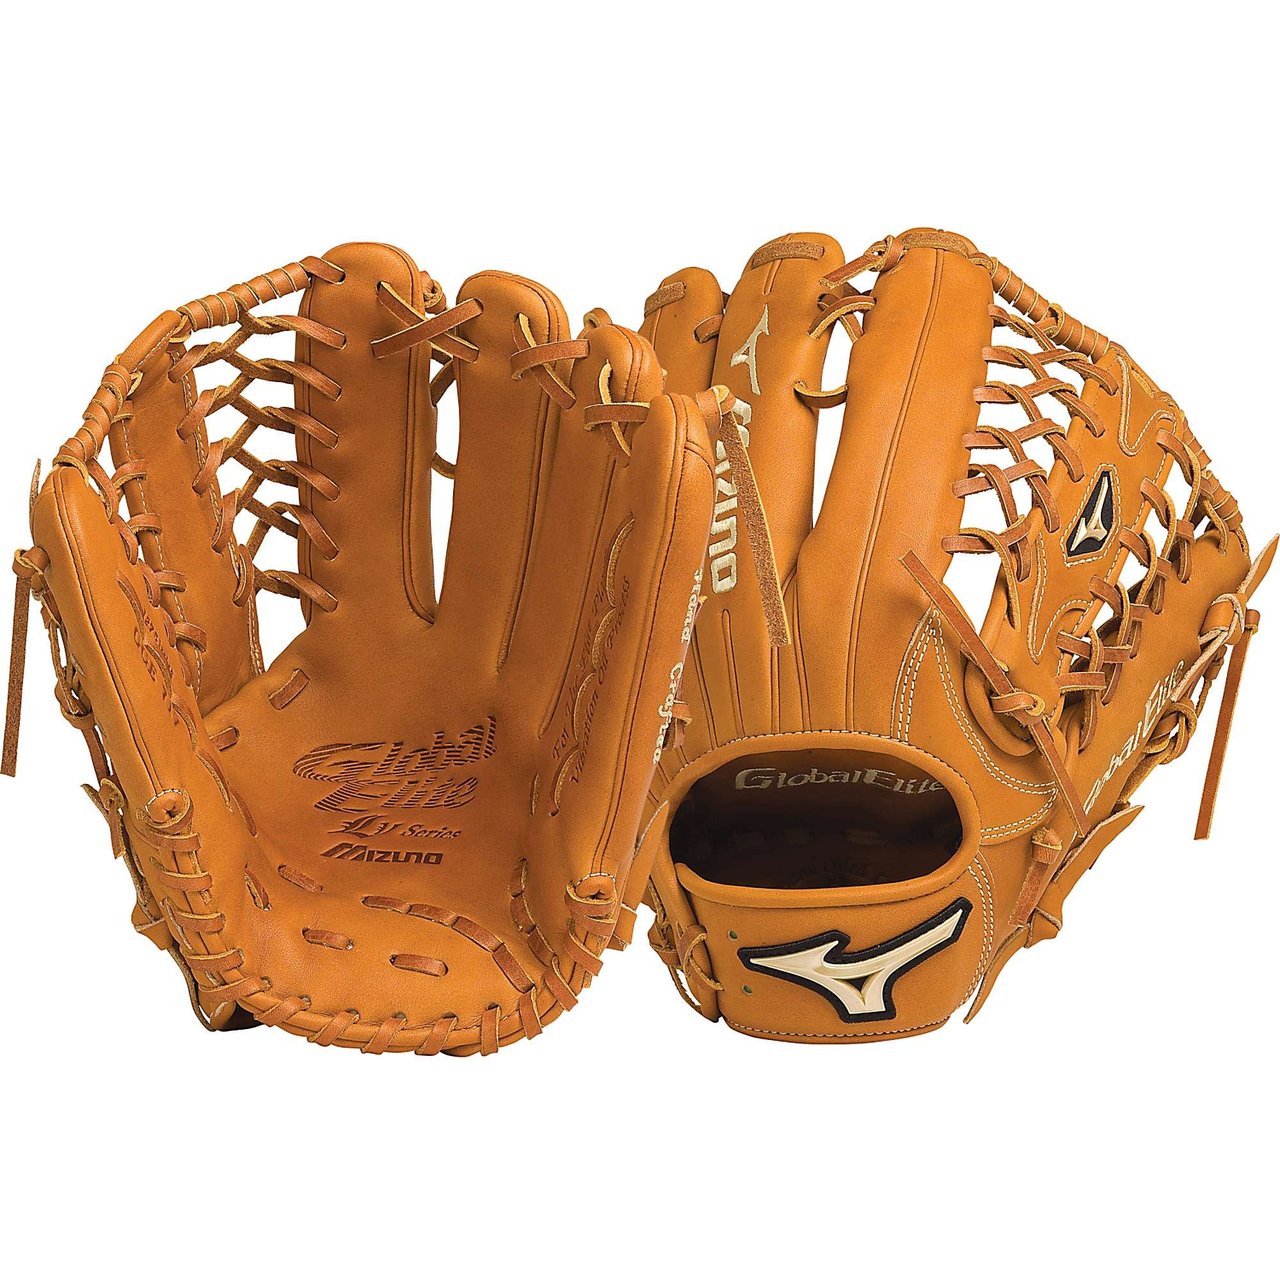 Mizuno GGE71V Global Elite VOP 12.75 in Outfield Baseball Glove (Left Handed Throw) : Mizuno vibration processed hand oiled leather and roll Welting which increases structure and support throughout the fingers. Rugged polyurethane patch and antimicrobial cushioned wrist pad for a secure fit. Thumb Embroidery. VOP Leather Palm. 12.75 Inch